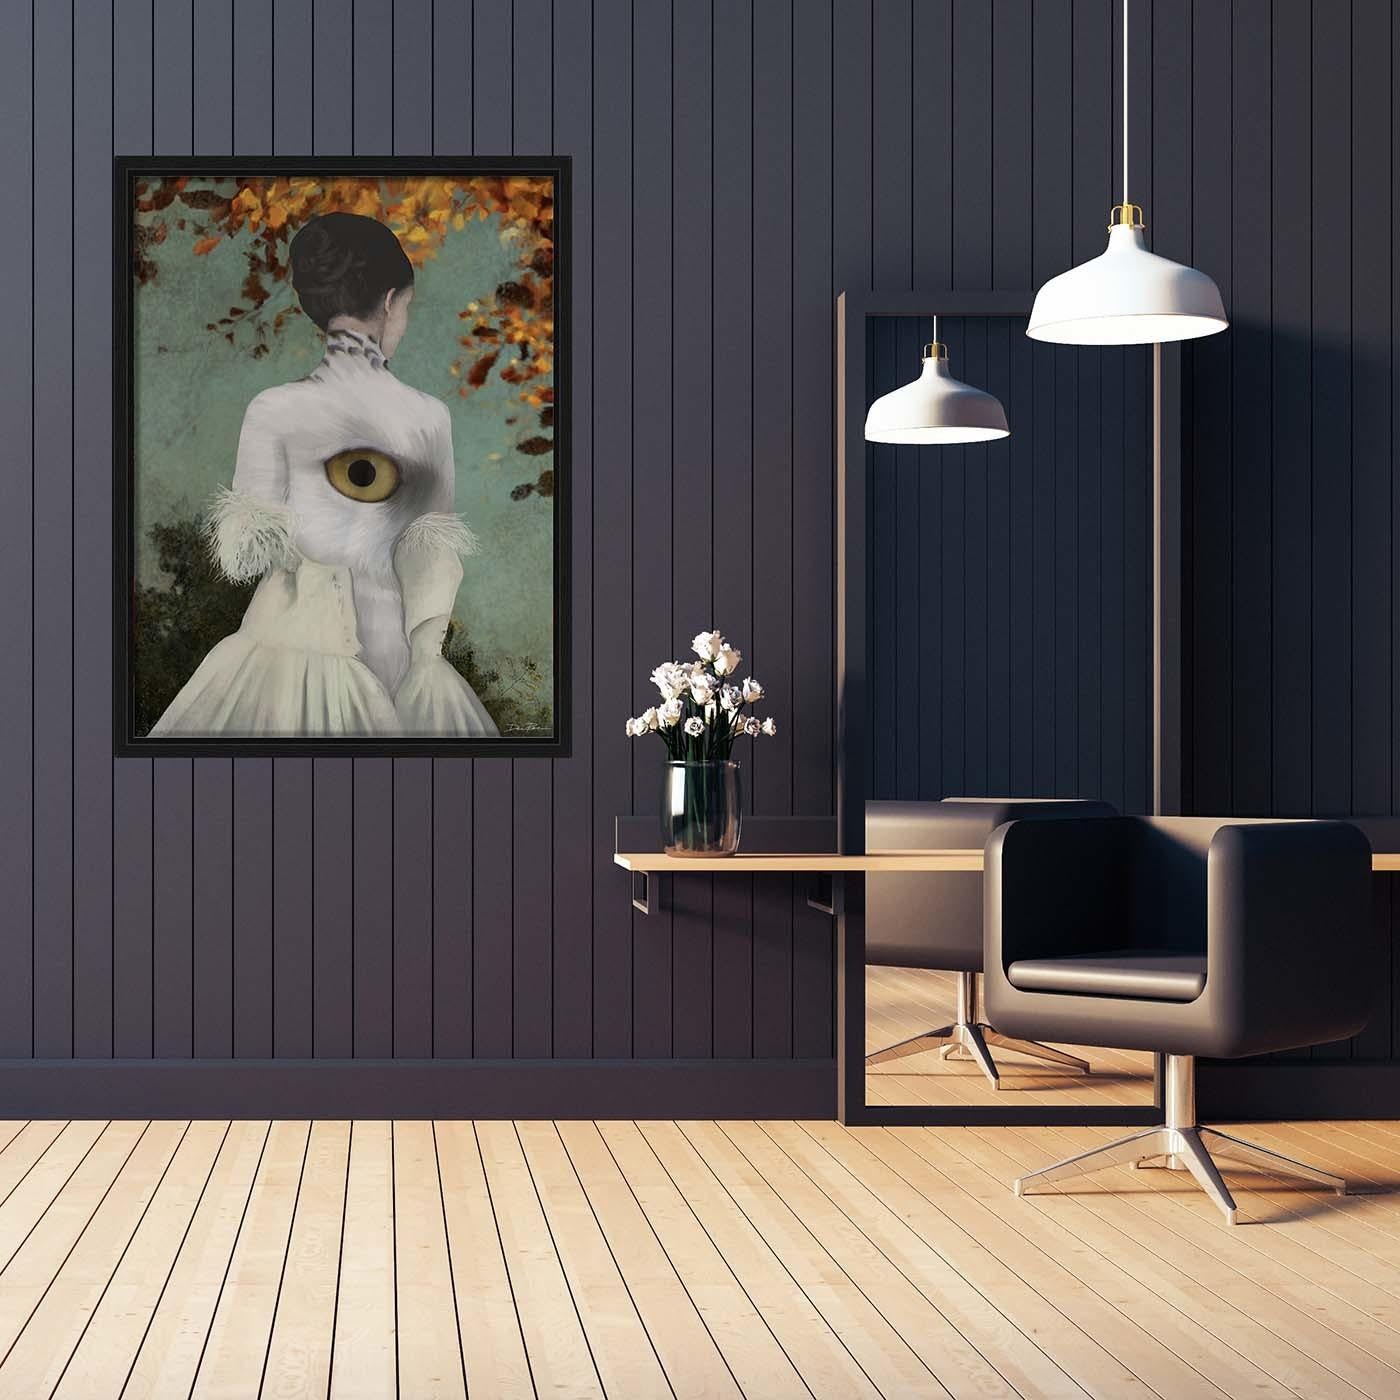 On a fine cotton pictorial canvas with an American box frame in basswood, this stunning limited edition artwork is a digital pictorial piece made by assembling photographs and illustrations. The pop-surrealist artwork depicts an eye as the mirror of